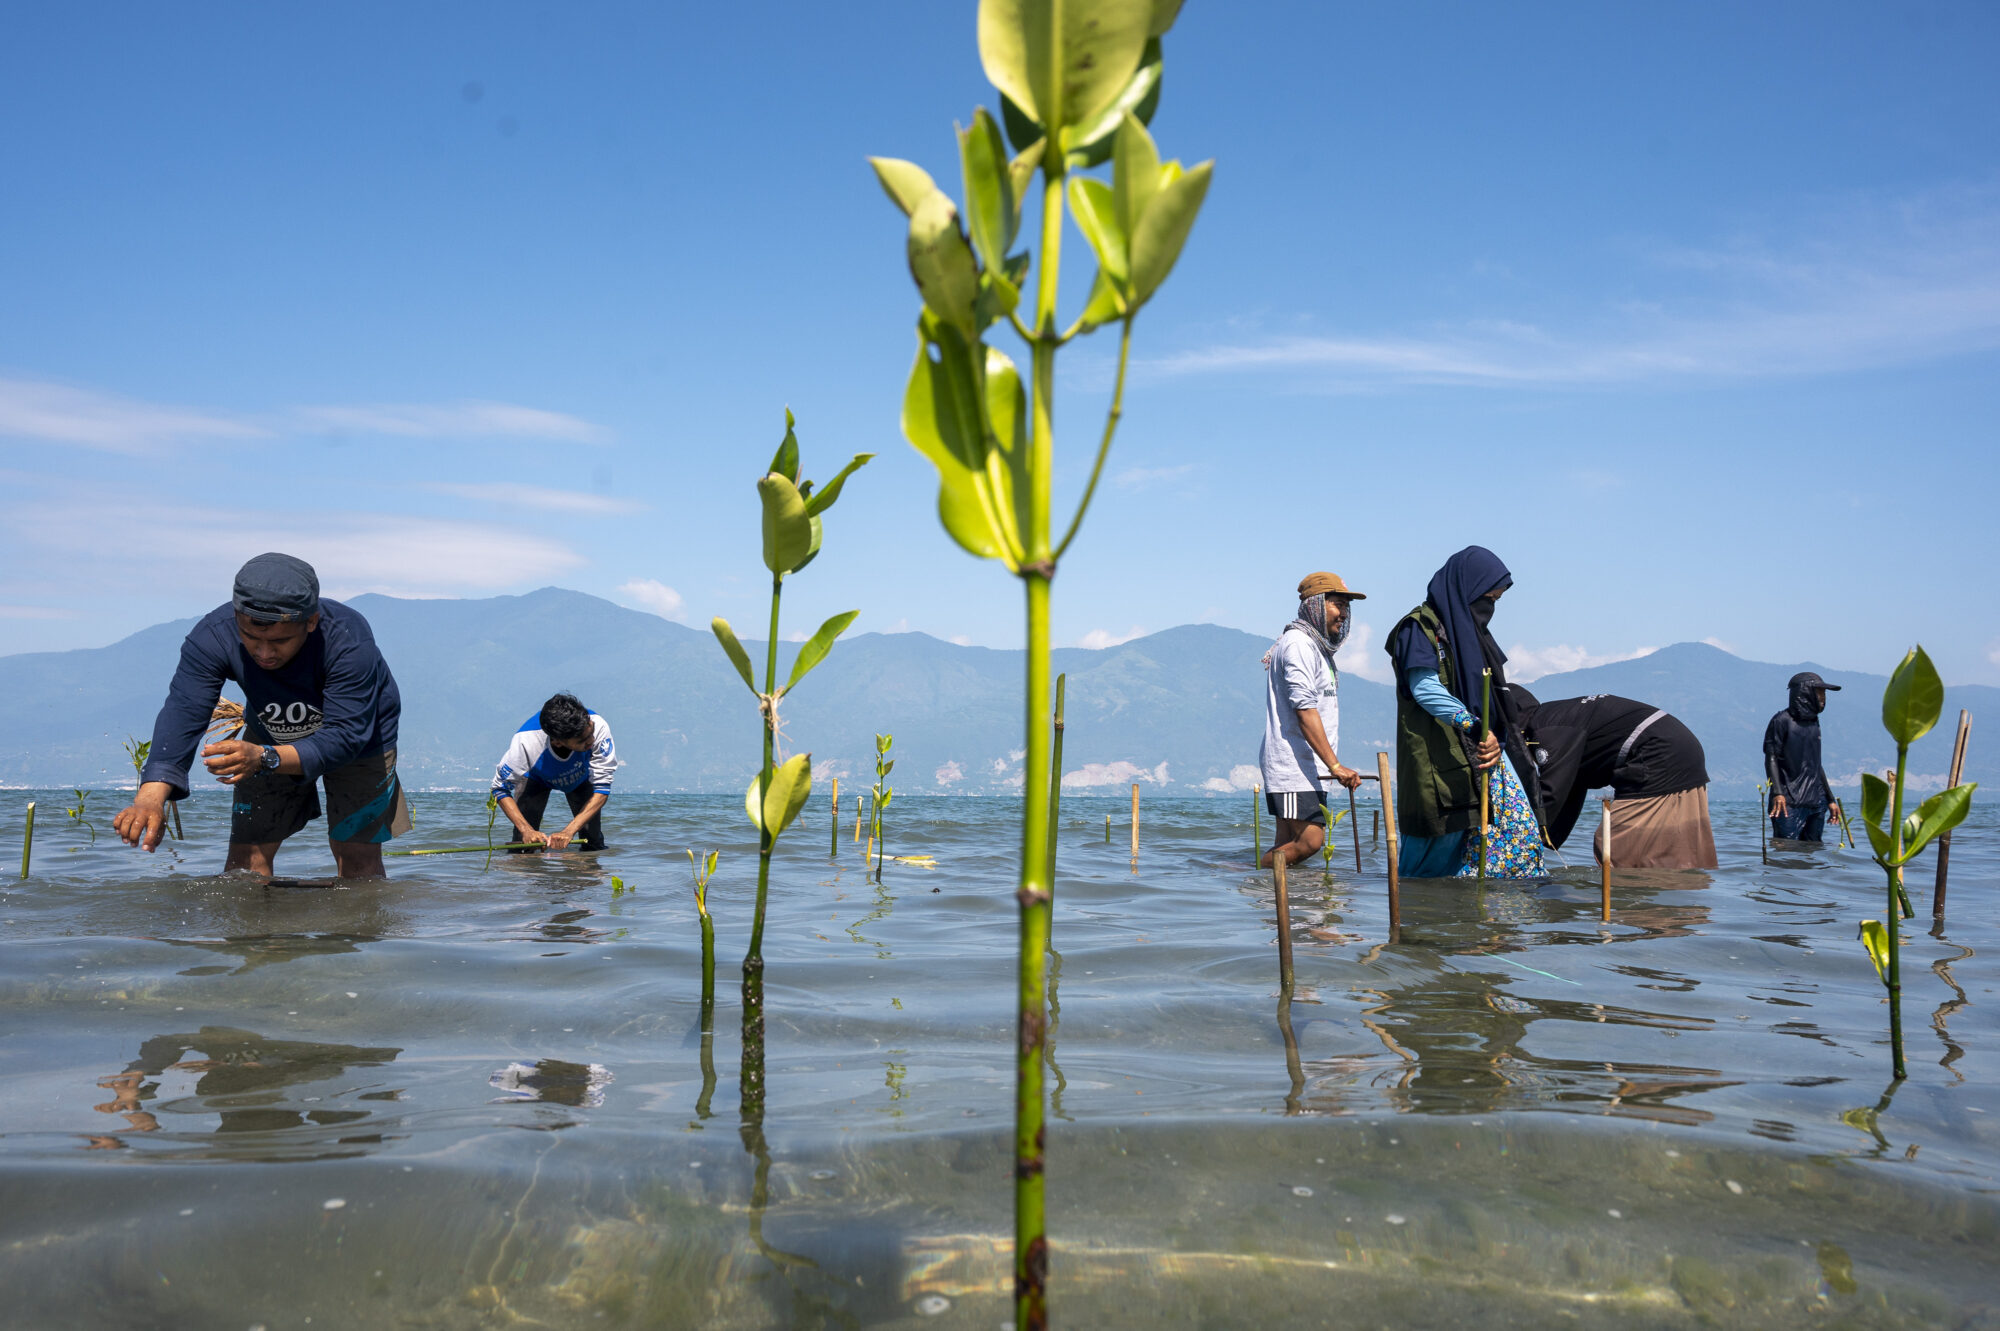 A group of people planting mangrove tree saplings in knee-length water. In the centre the green shoot of one sapling can be seen rising from the sand, above the water into the blue sky.